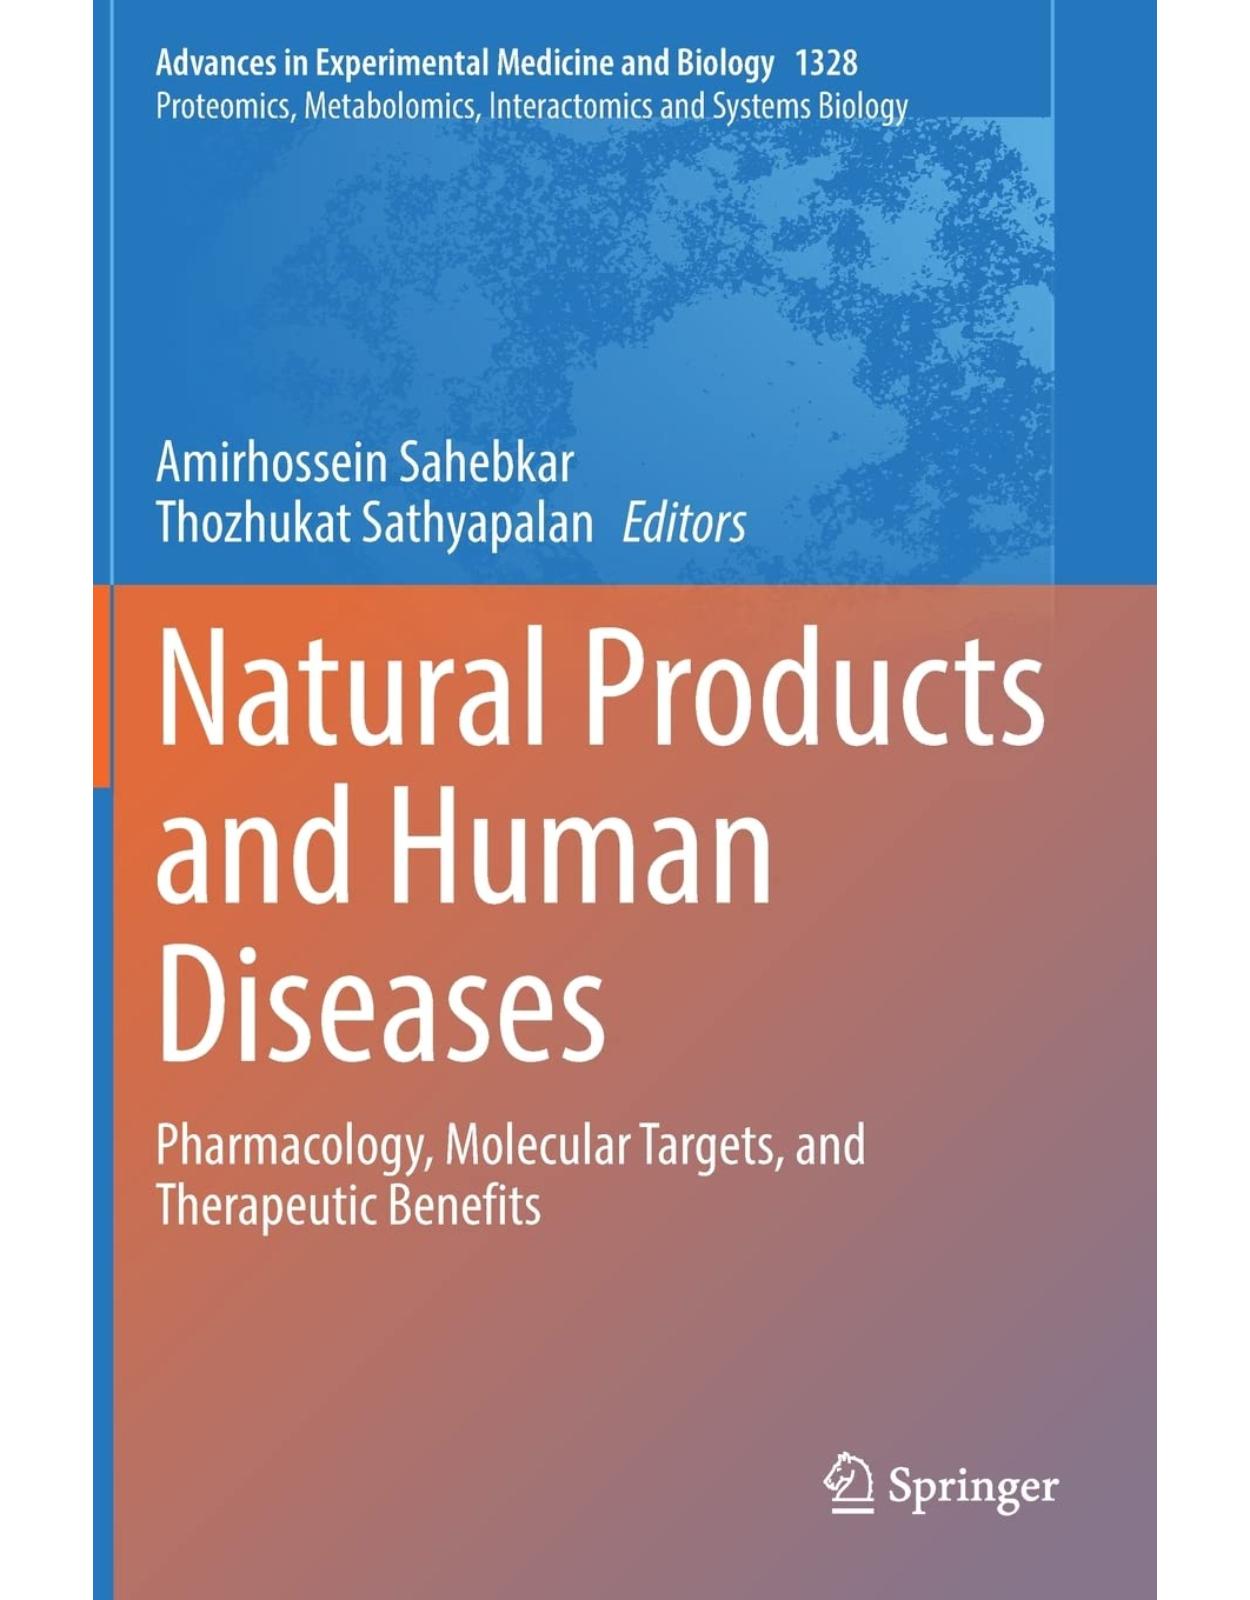 Natural Products and Human Diseases